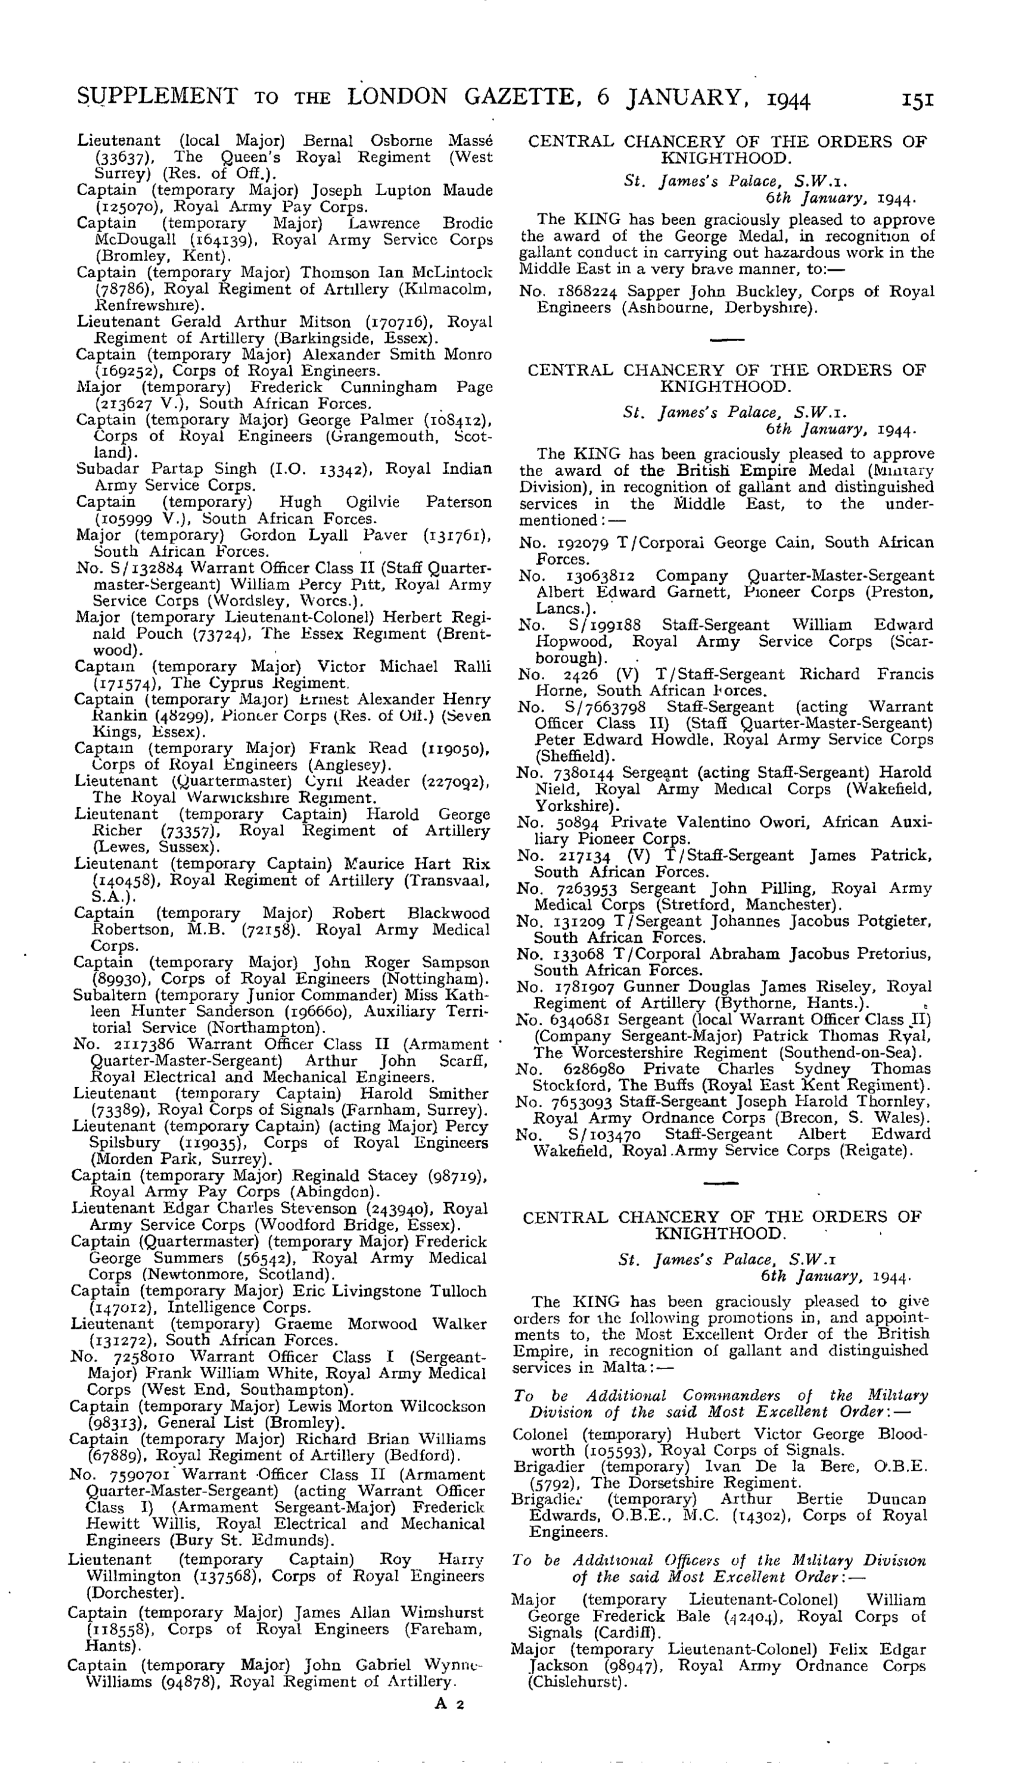 Supplement to the London Gazette, 6 January, 1944